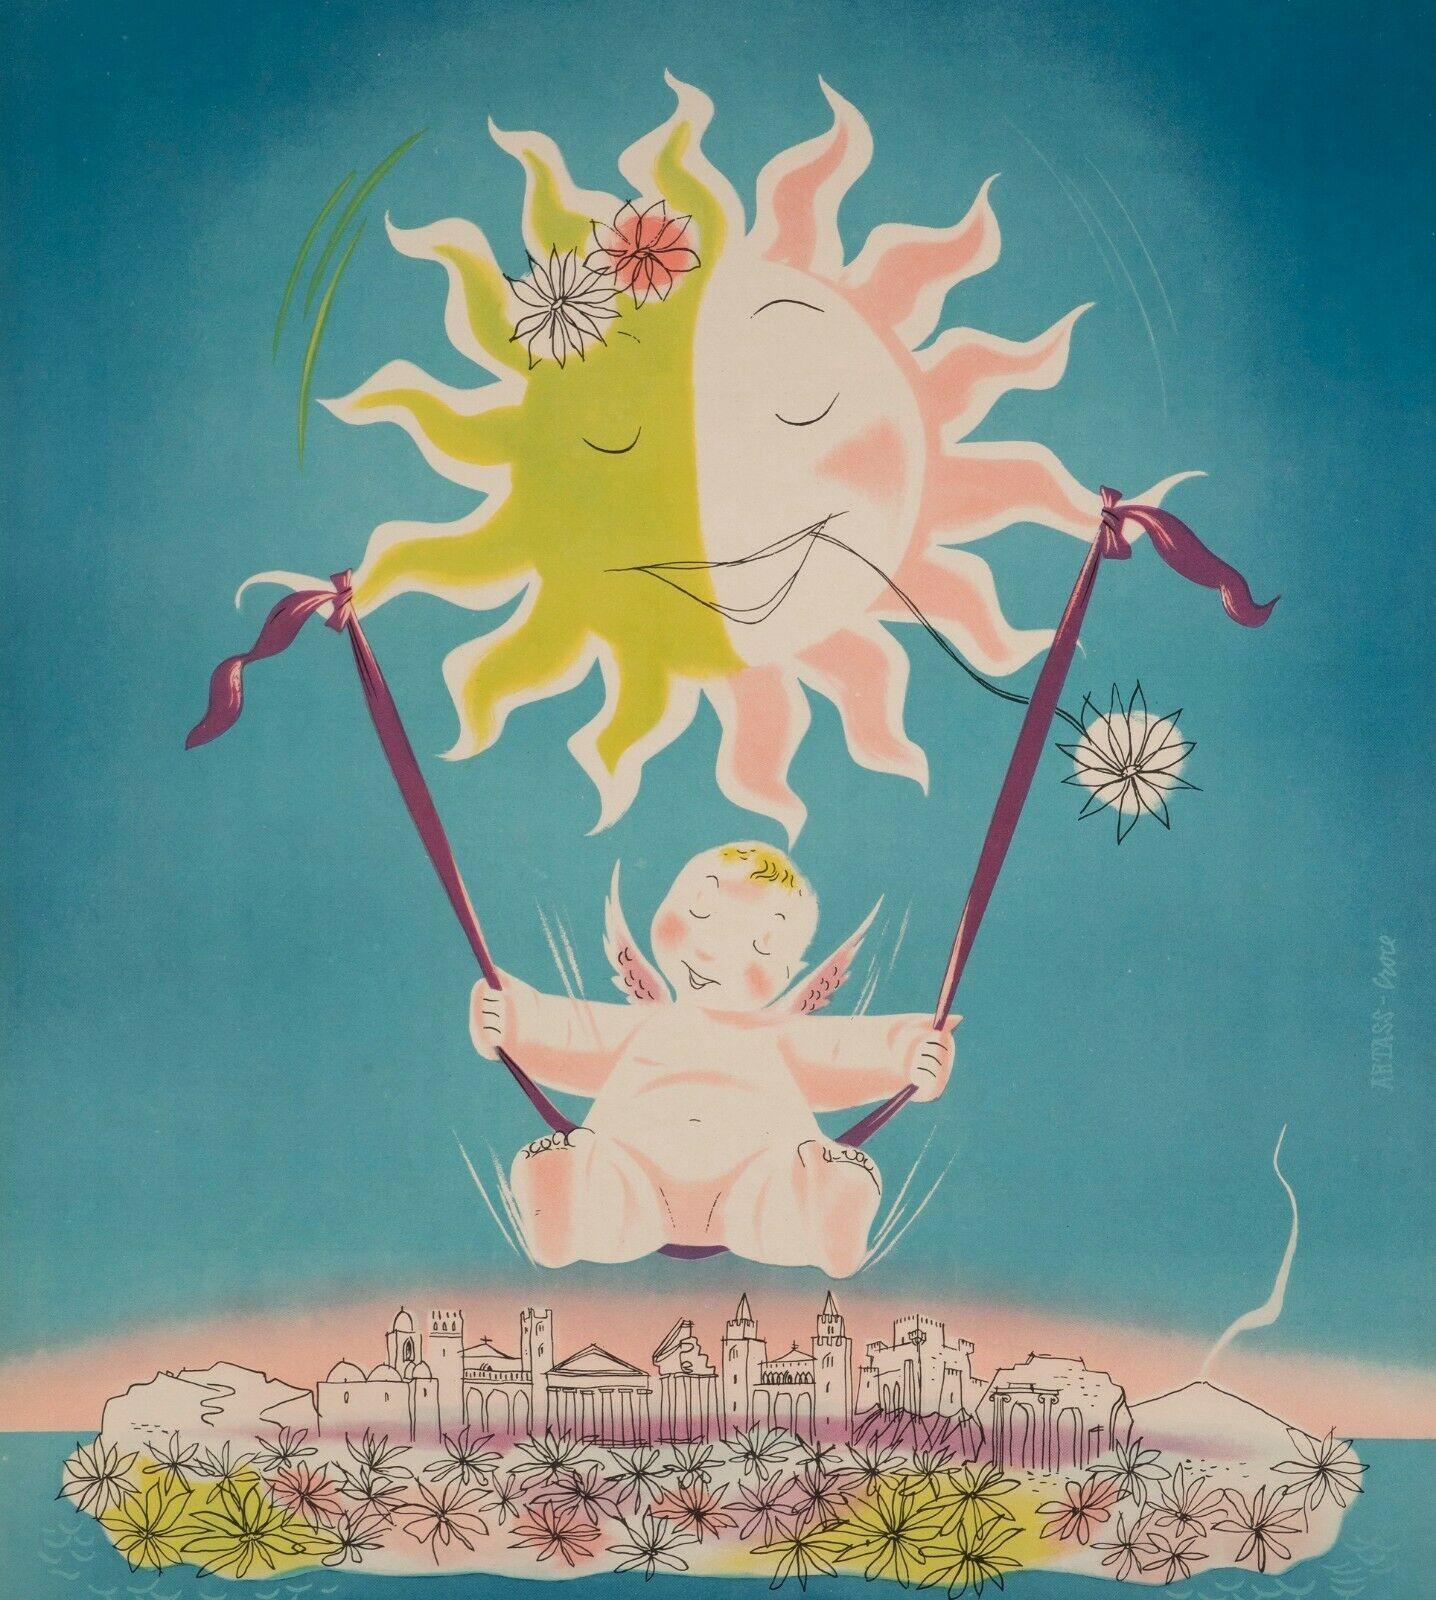 Original Poster-Artass Croce-Sicily-Palermo-Catania-Syracuse, 1952

Poster to promote tourism in Sicily (Italy). On the poster, an angel is swinging under the Sicilian sun.

Additional Information:
Materials and Techniques: Colour lithograph on